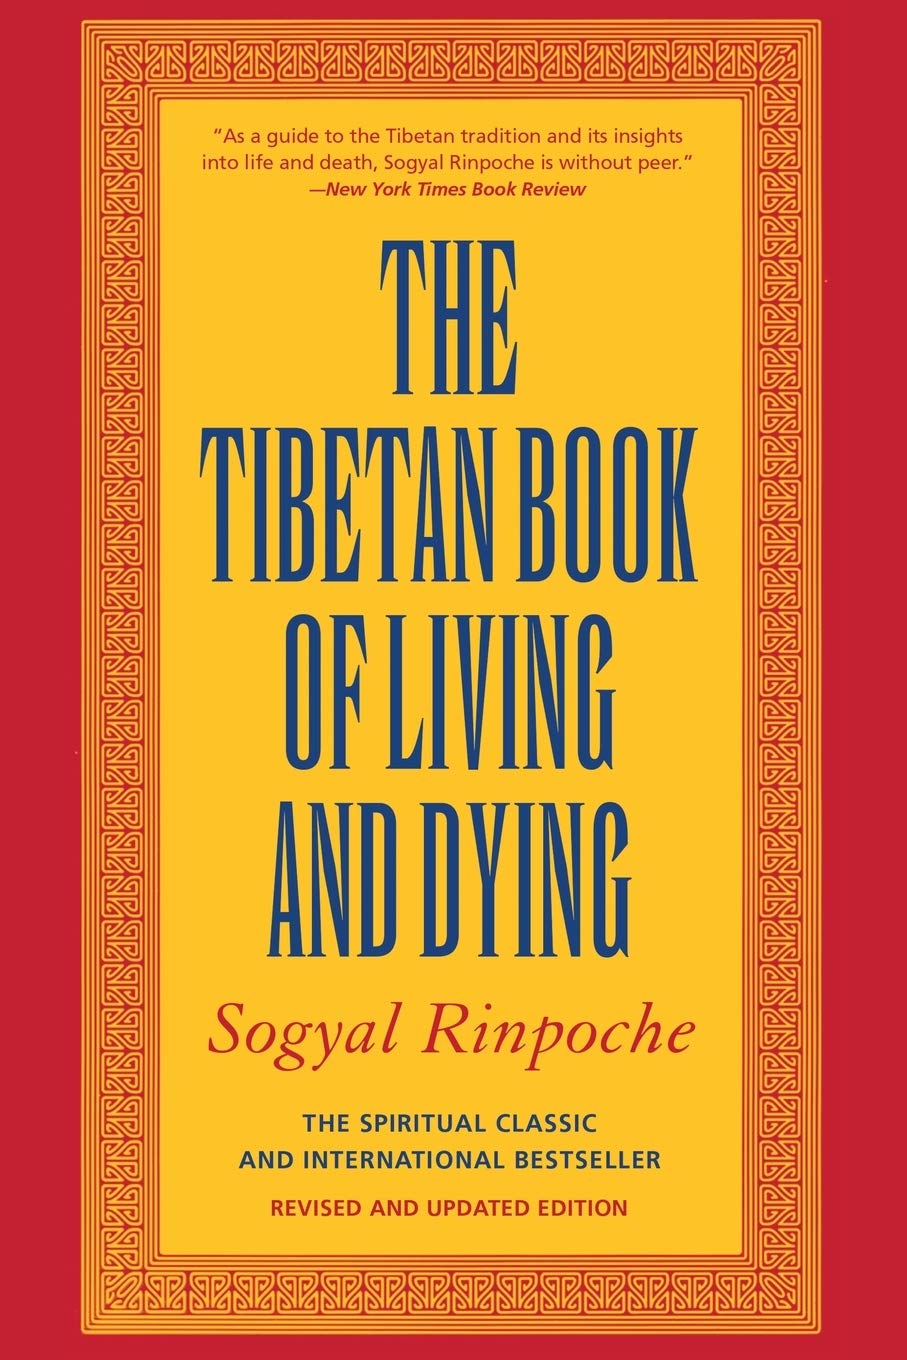 The Tibetan Book Of Living And Dying: The Spiritual Classic & International Bestseller: 25th Anniversary Edition [Sogyal Rinpoche]